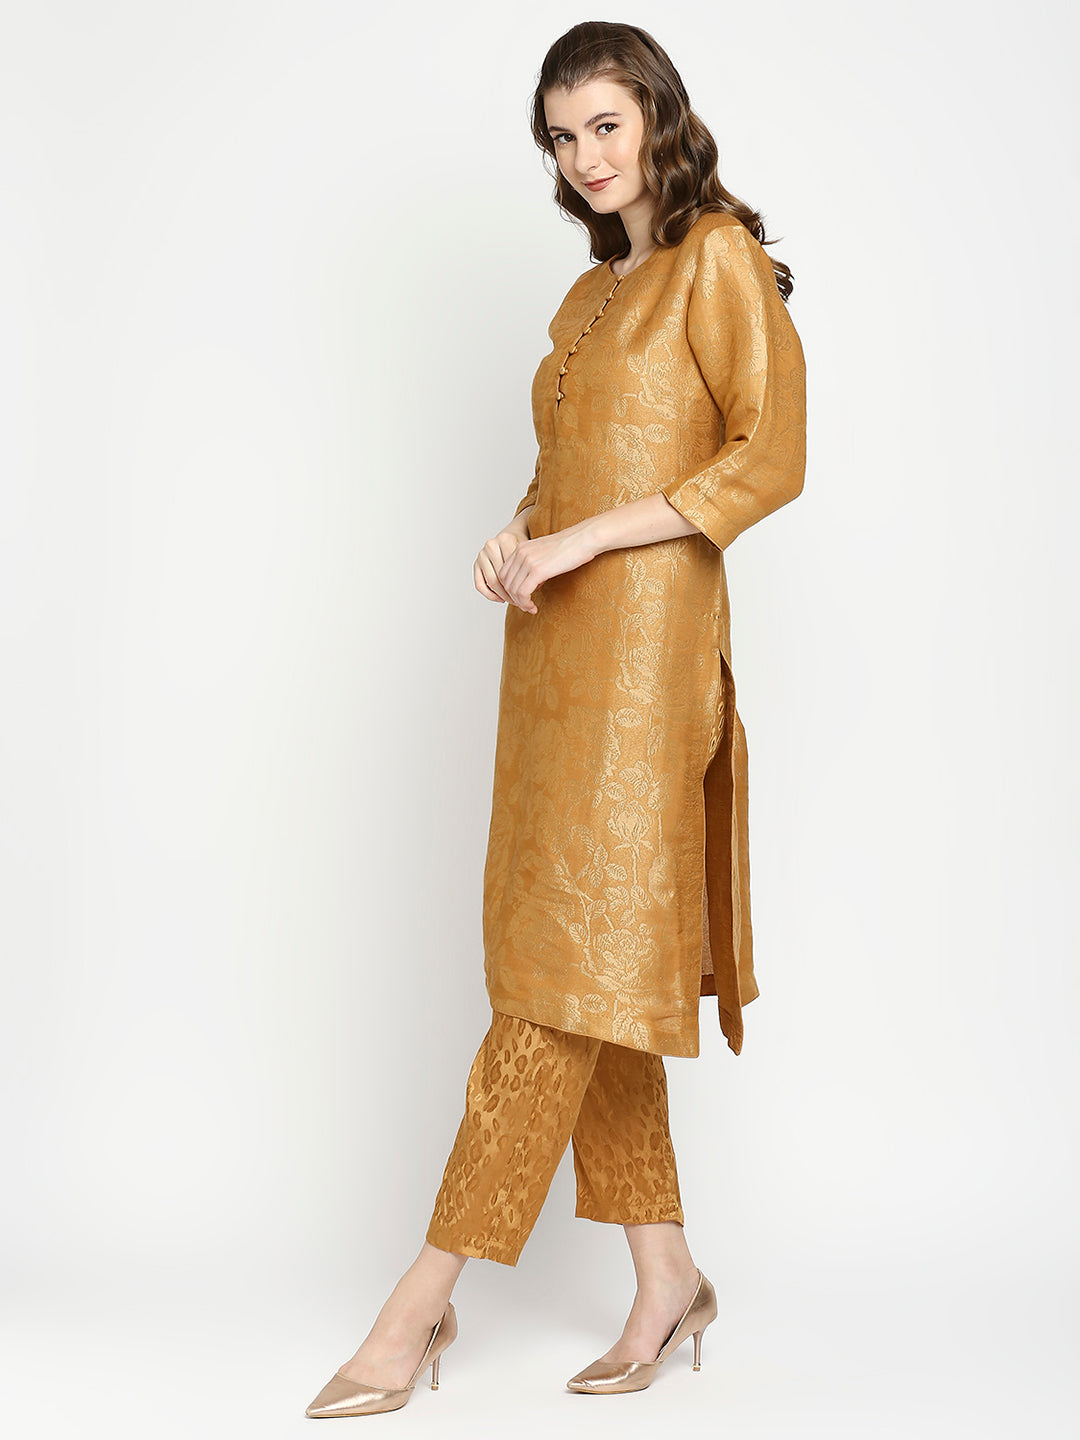 Buy Amegh Mustard Color Silk Kurti Set with Pant and Dupatta for Women  (XX-Large) at Amazon.in